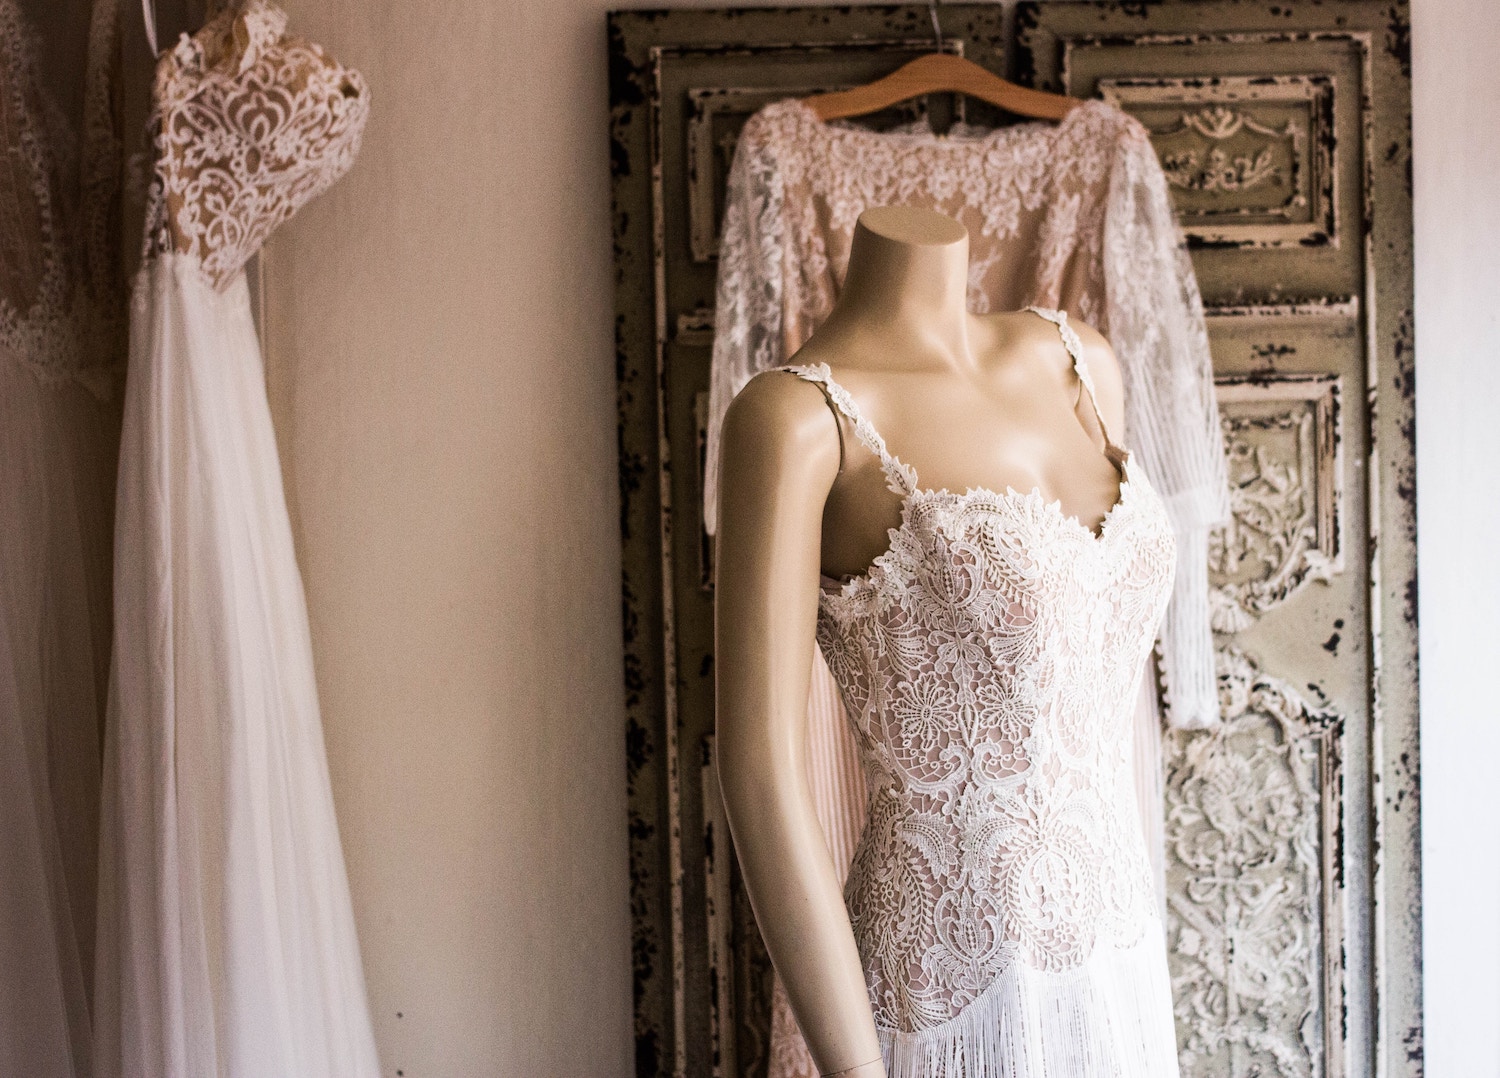 These are the top wedding dress trends for 2019, according to Vogue |  Independent.ie